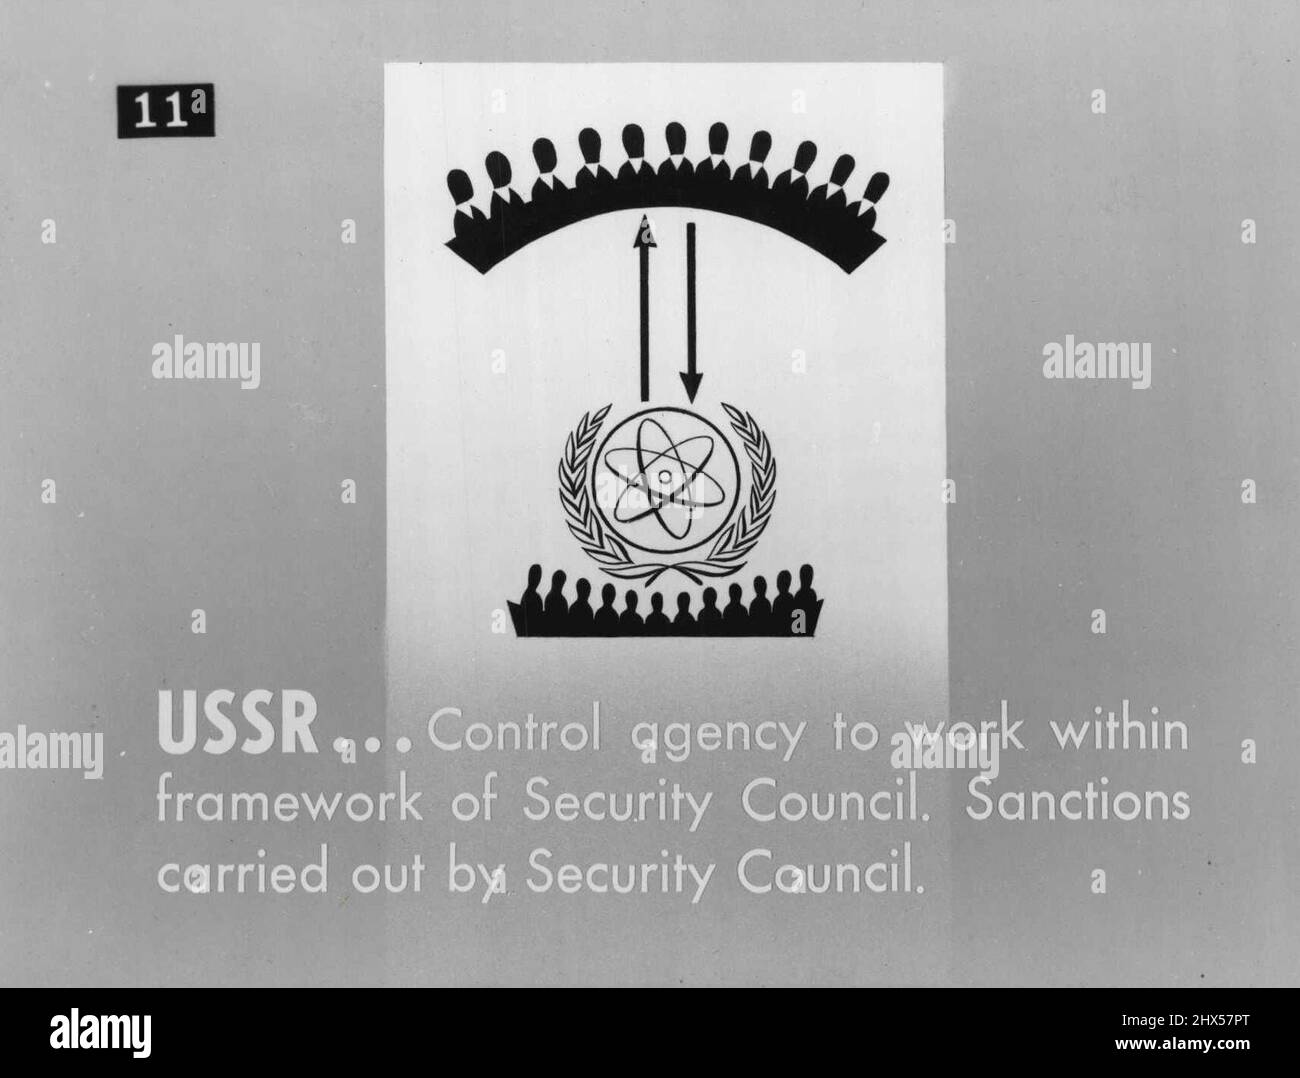 Atomic Energy - Problems Of International Control. Enforcement And Sections - U.S.S.R. United Nation control agency to work within the framework of the Security Council, as stipulated in the United Nations Charter and the General Assembly Resolution which created the Atomic Energy Commission. Sanctions to be carried out by the Security Council. April 12, 1949. (Photo by Official United Nations). Stock Photo